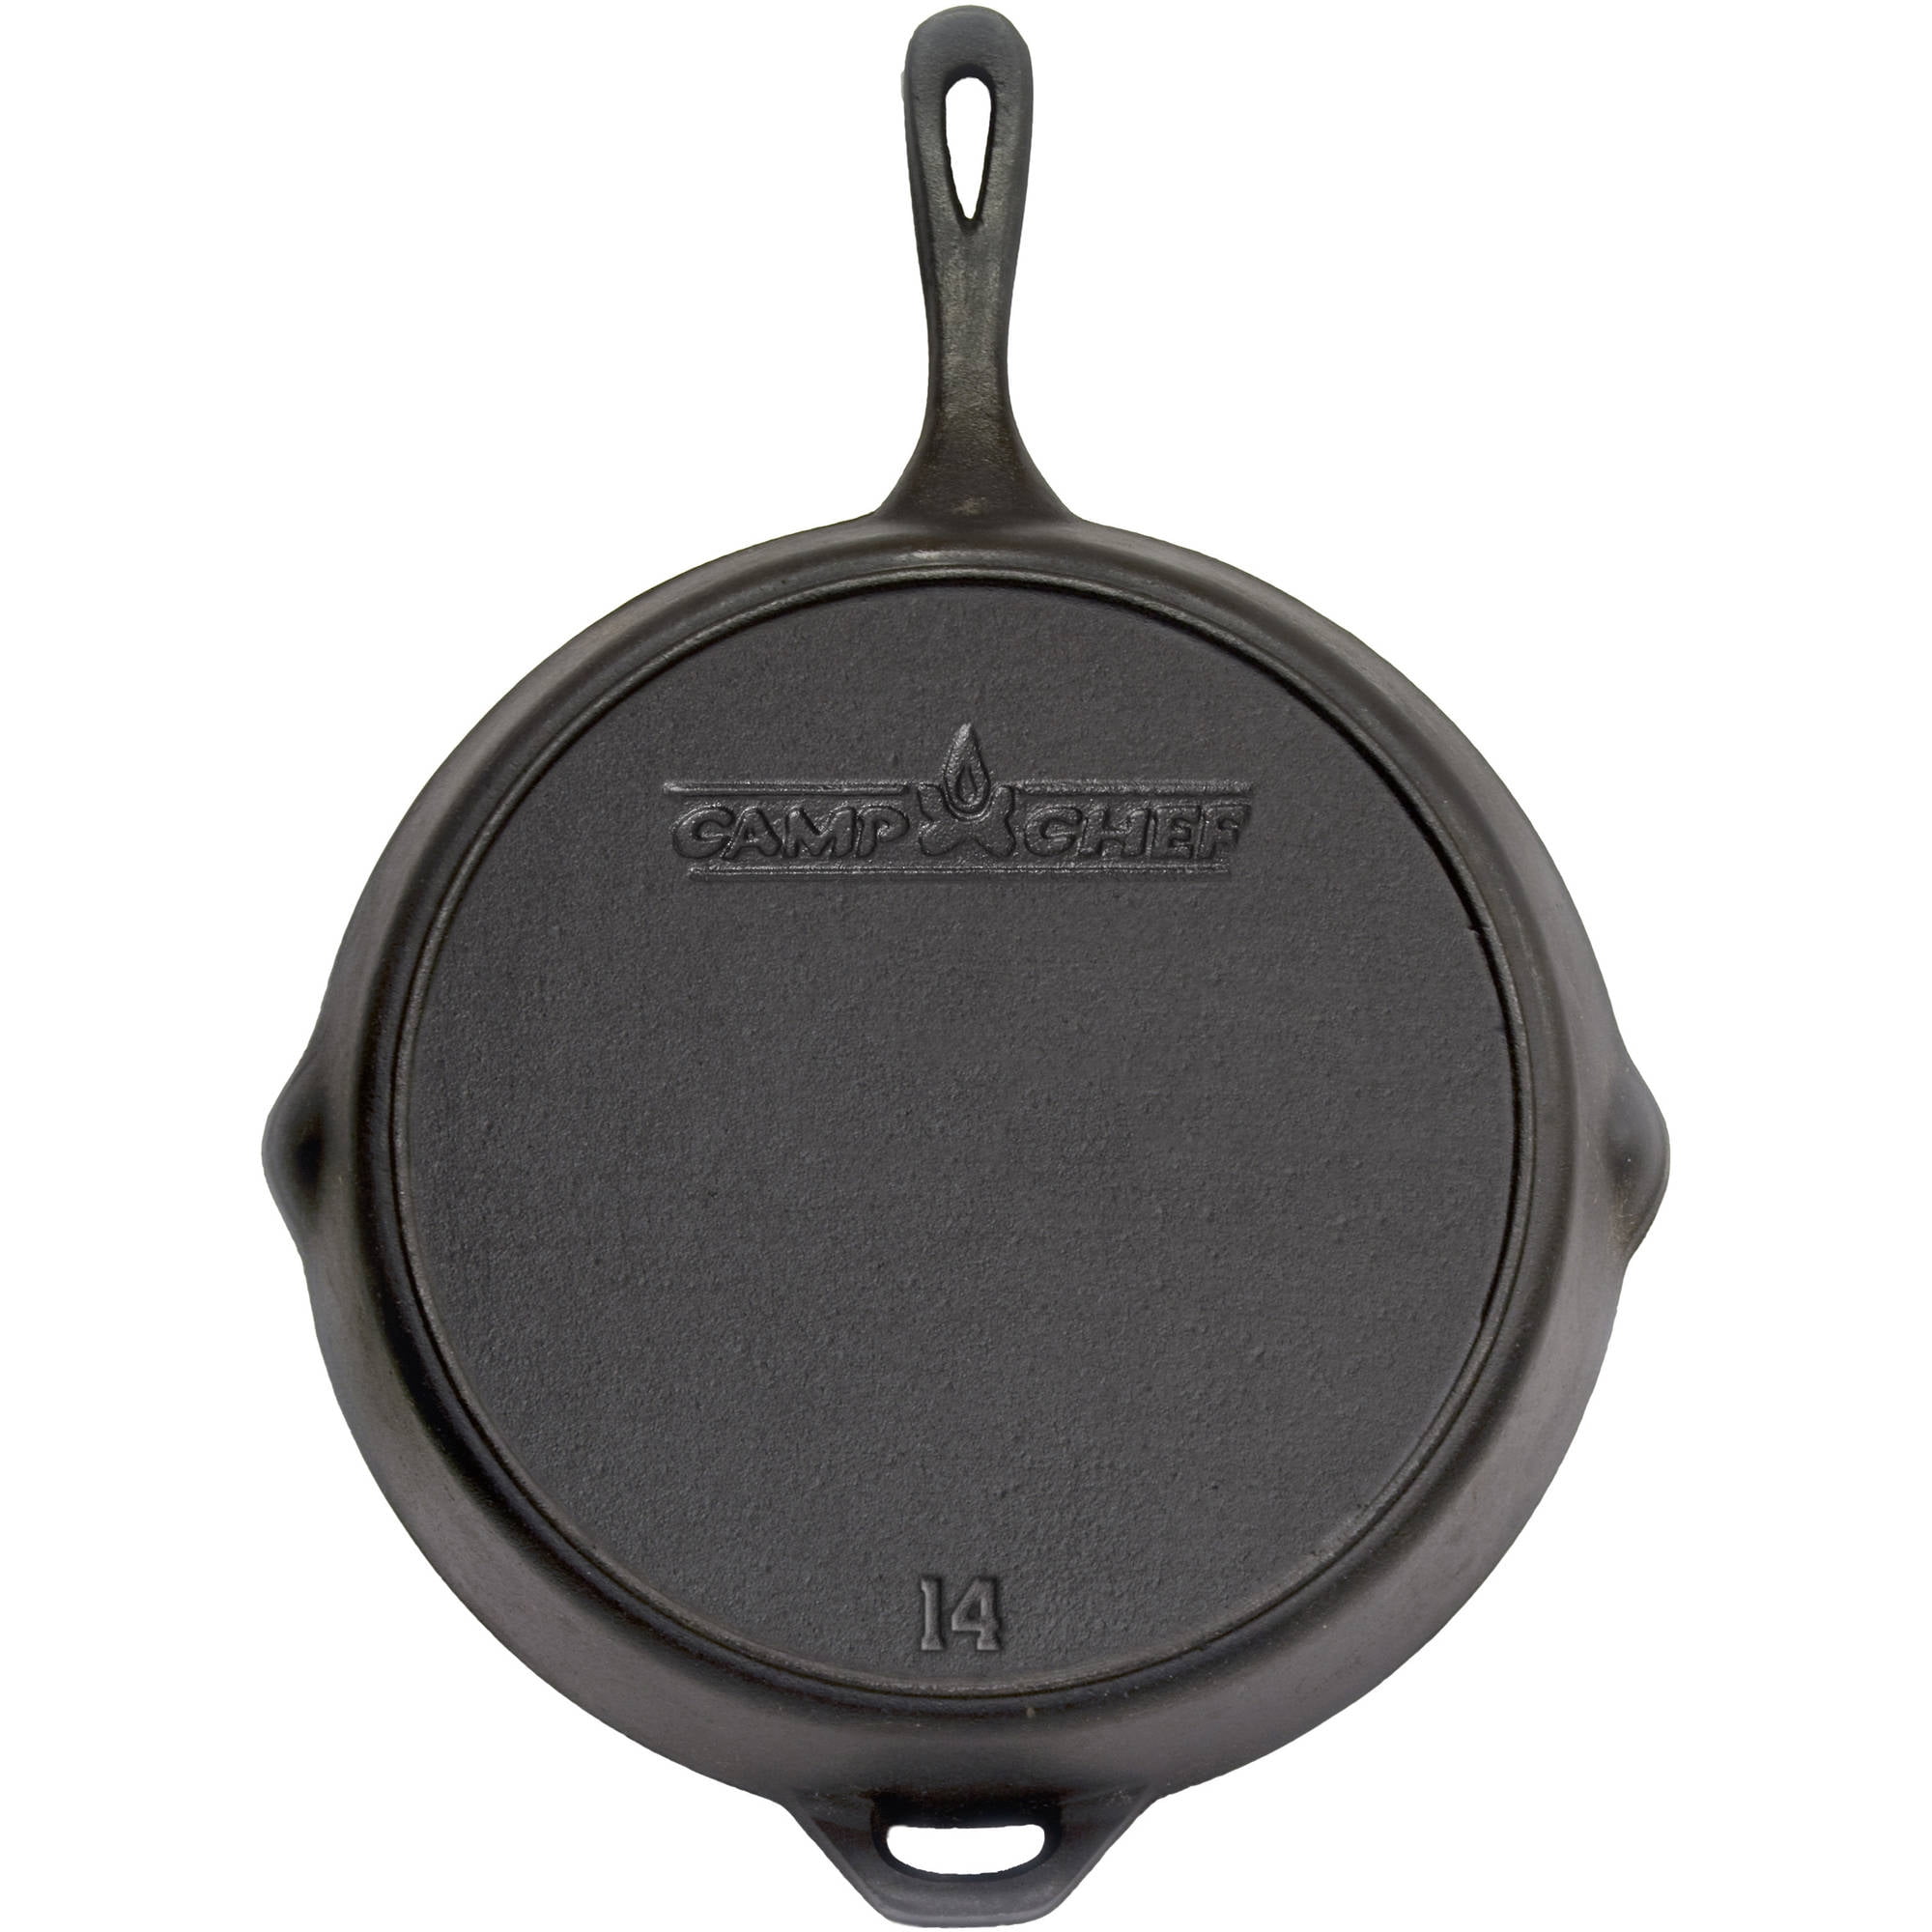 15 Amazing Cast Iron Skillet Recipes for Camping